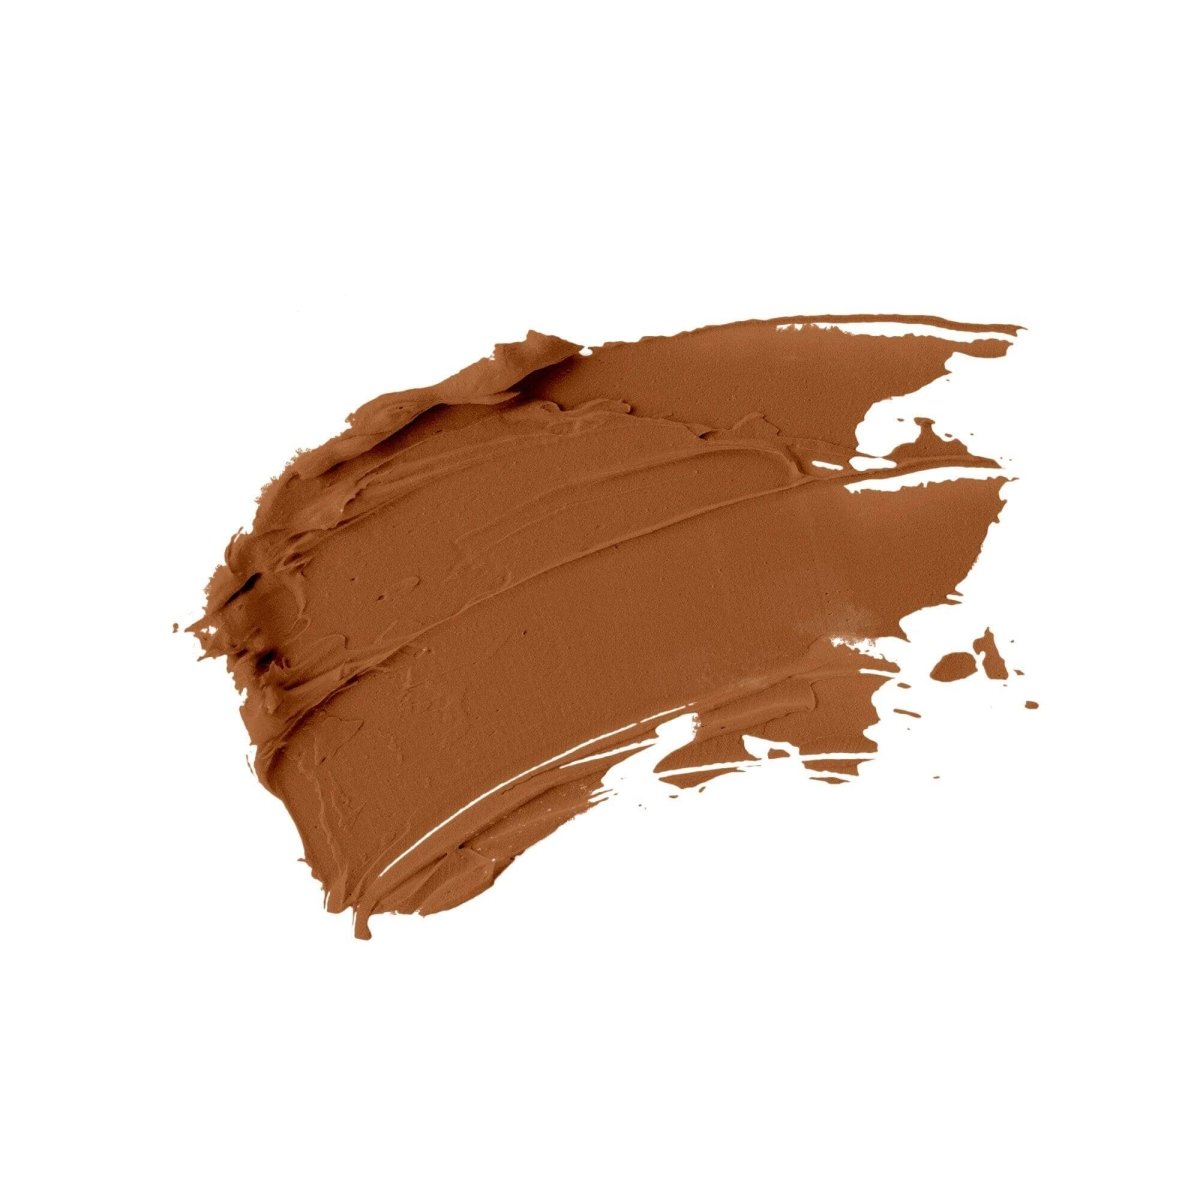 swatch of ebony natural liquid foundation on a white background